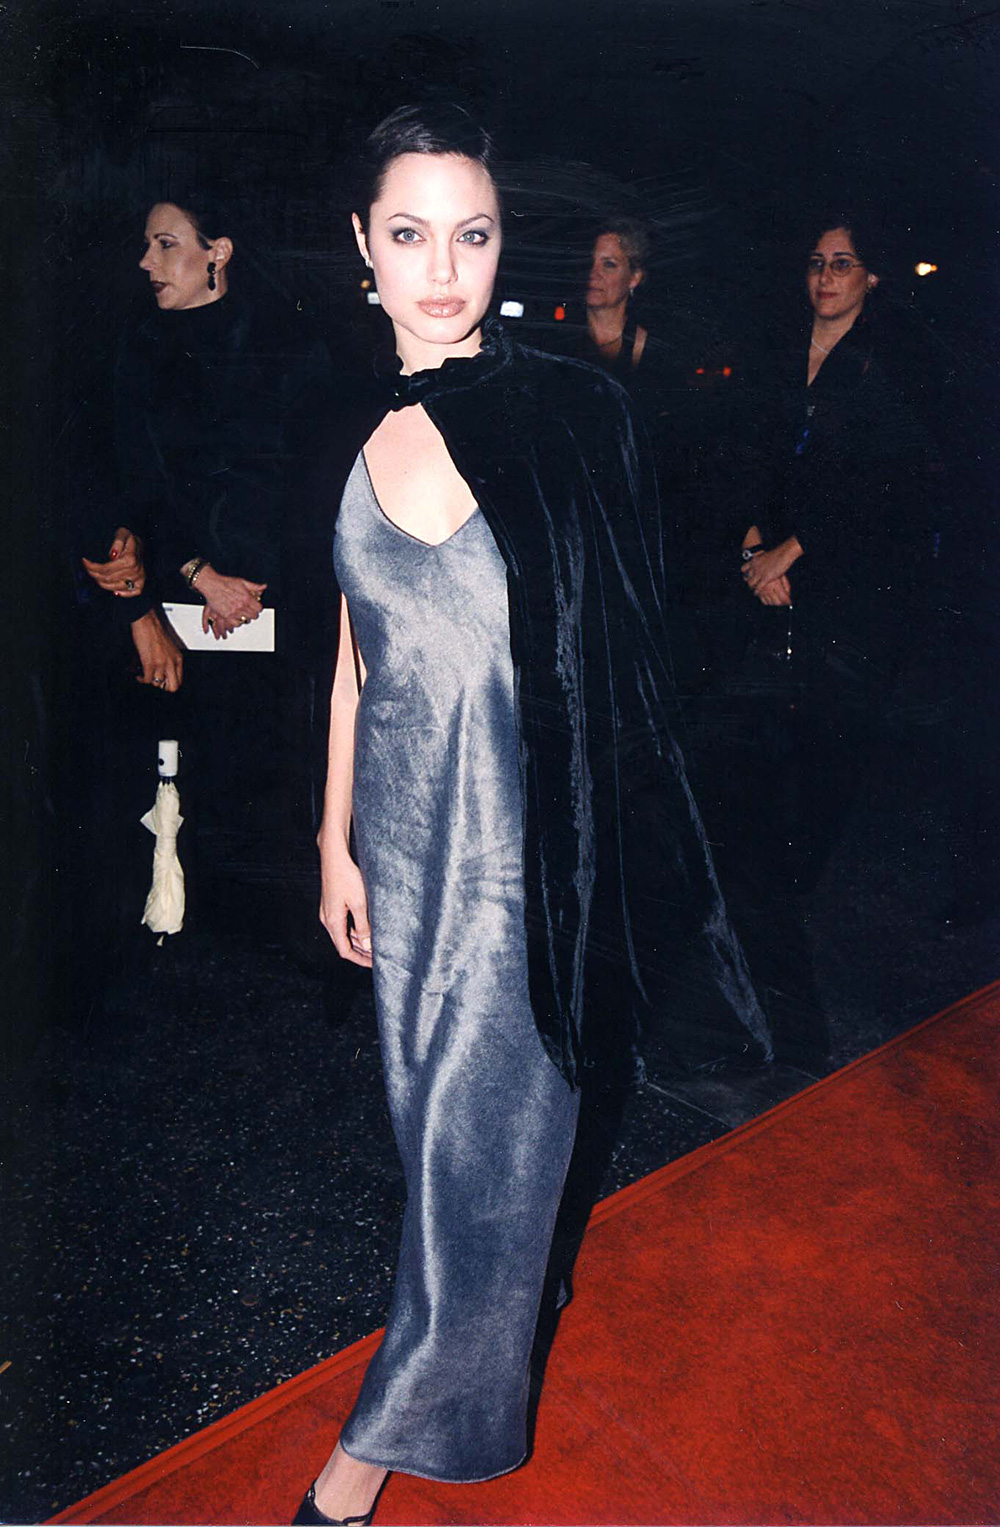 Meanwhile, a pre-Brad Angelina was all about layered velvet, heavy eyeliner and a pixie crop - grungy 90s at its best.